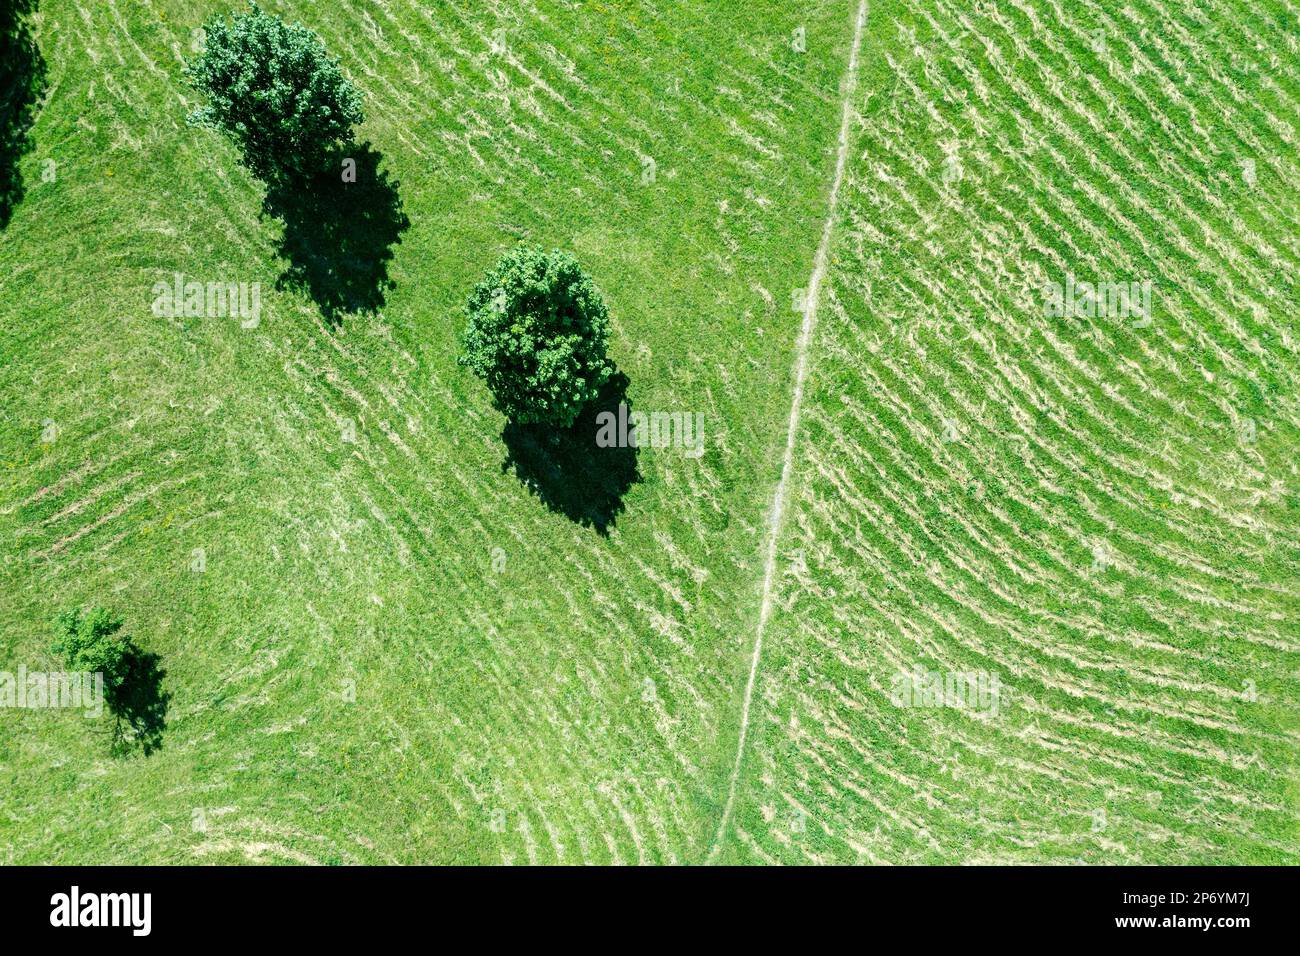 footpath through beveled green lawn with trees. aerial top view with drone. Stock Photo